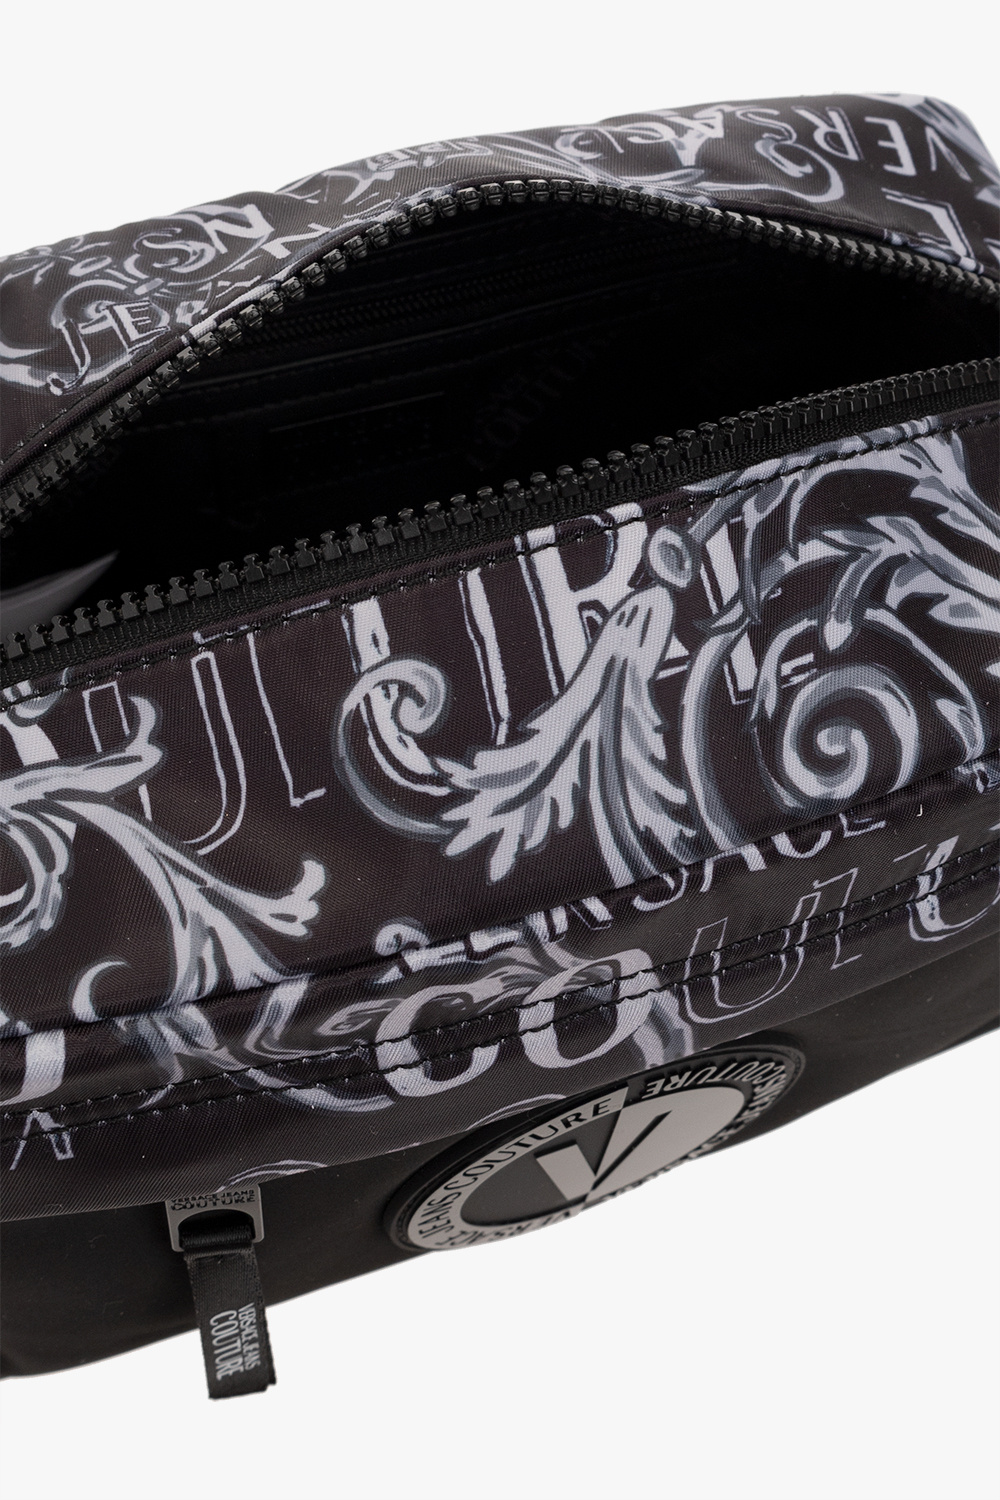 Versace jeans Polo Couture Patterned handbag